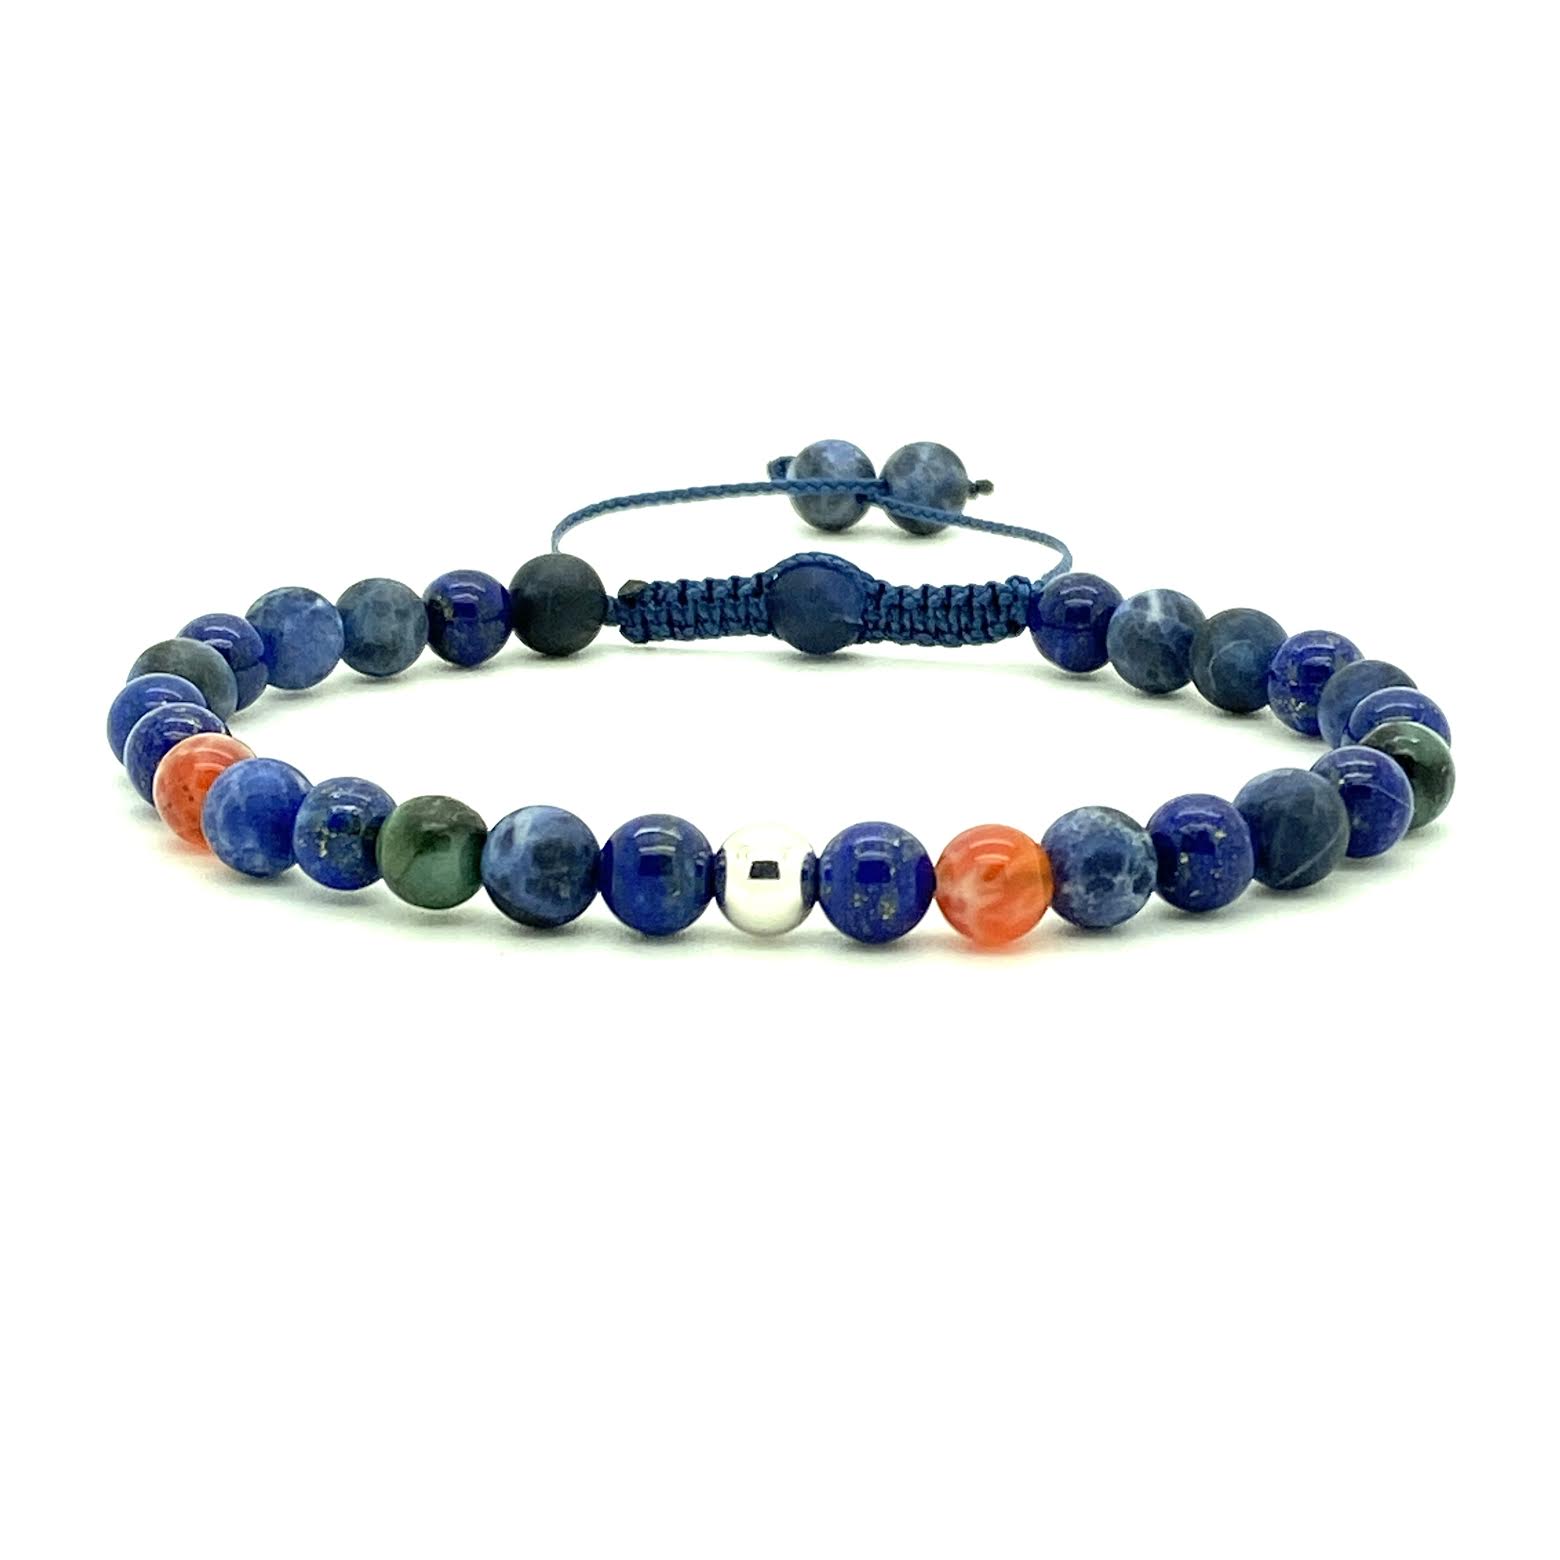 Lapis Lazuli is a stunning semi-precious stone that has the power to bring deep peace, harmony, honesty and self-expression. Accented with Brazilian Emerald and Fire Agate  beads and your choice of a 14K solid white, rose or yellow gold bead. Hand knotted adjustable cord for a perfect fit. Made by WristBend